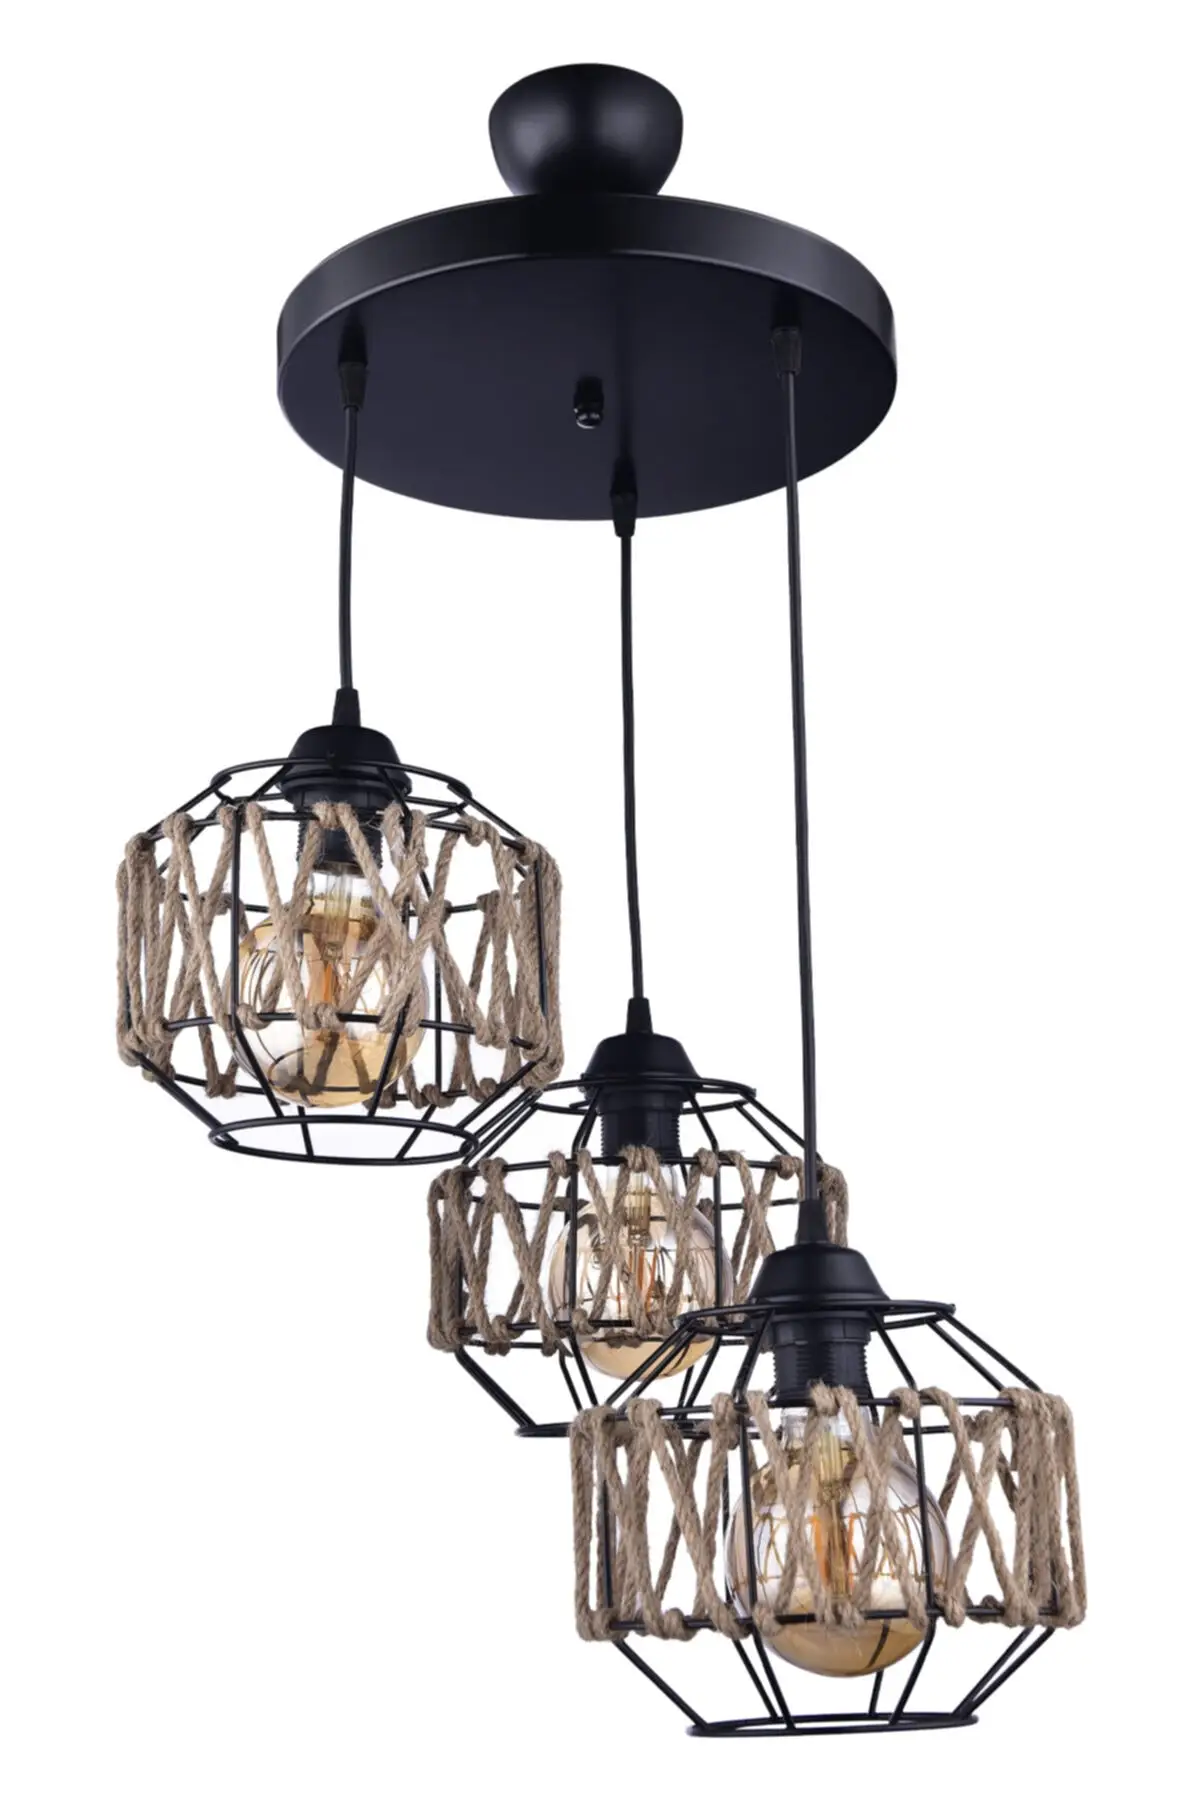 

Lux 3 Rope Pendant Chandelier, Modern Rustic Rope Lighting, Home Fashion Lamp Chandelier